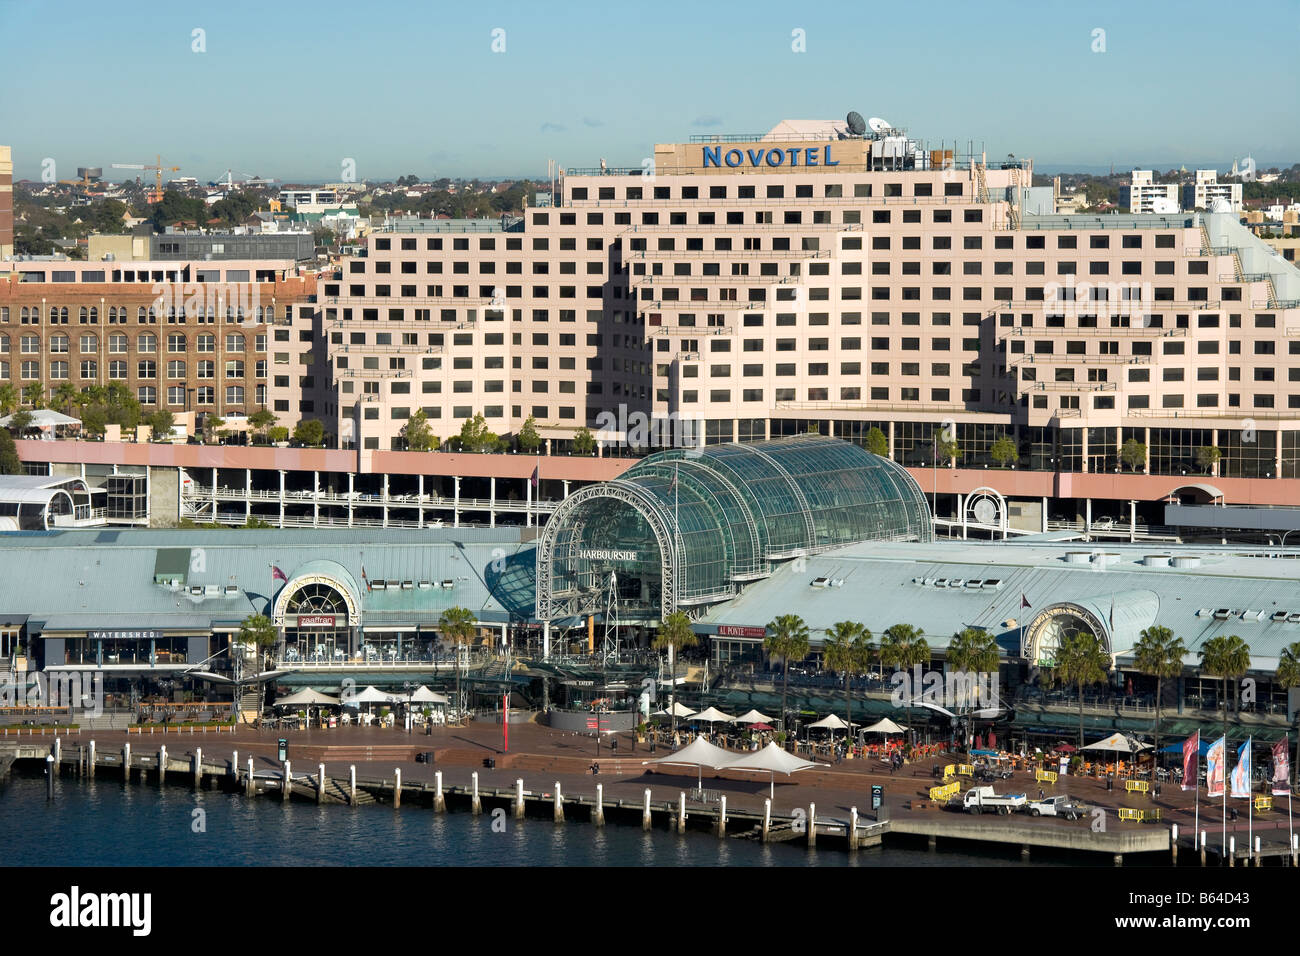 Sydney Australia. Novotel Hotel and Harbourside Shopping Mall and restaurants on Cockle Bay, Darling Harbour. Stock Photo